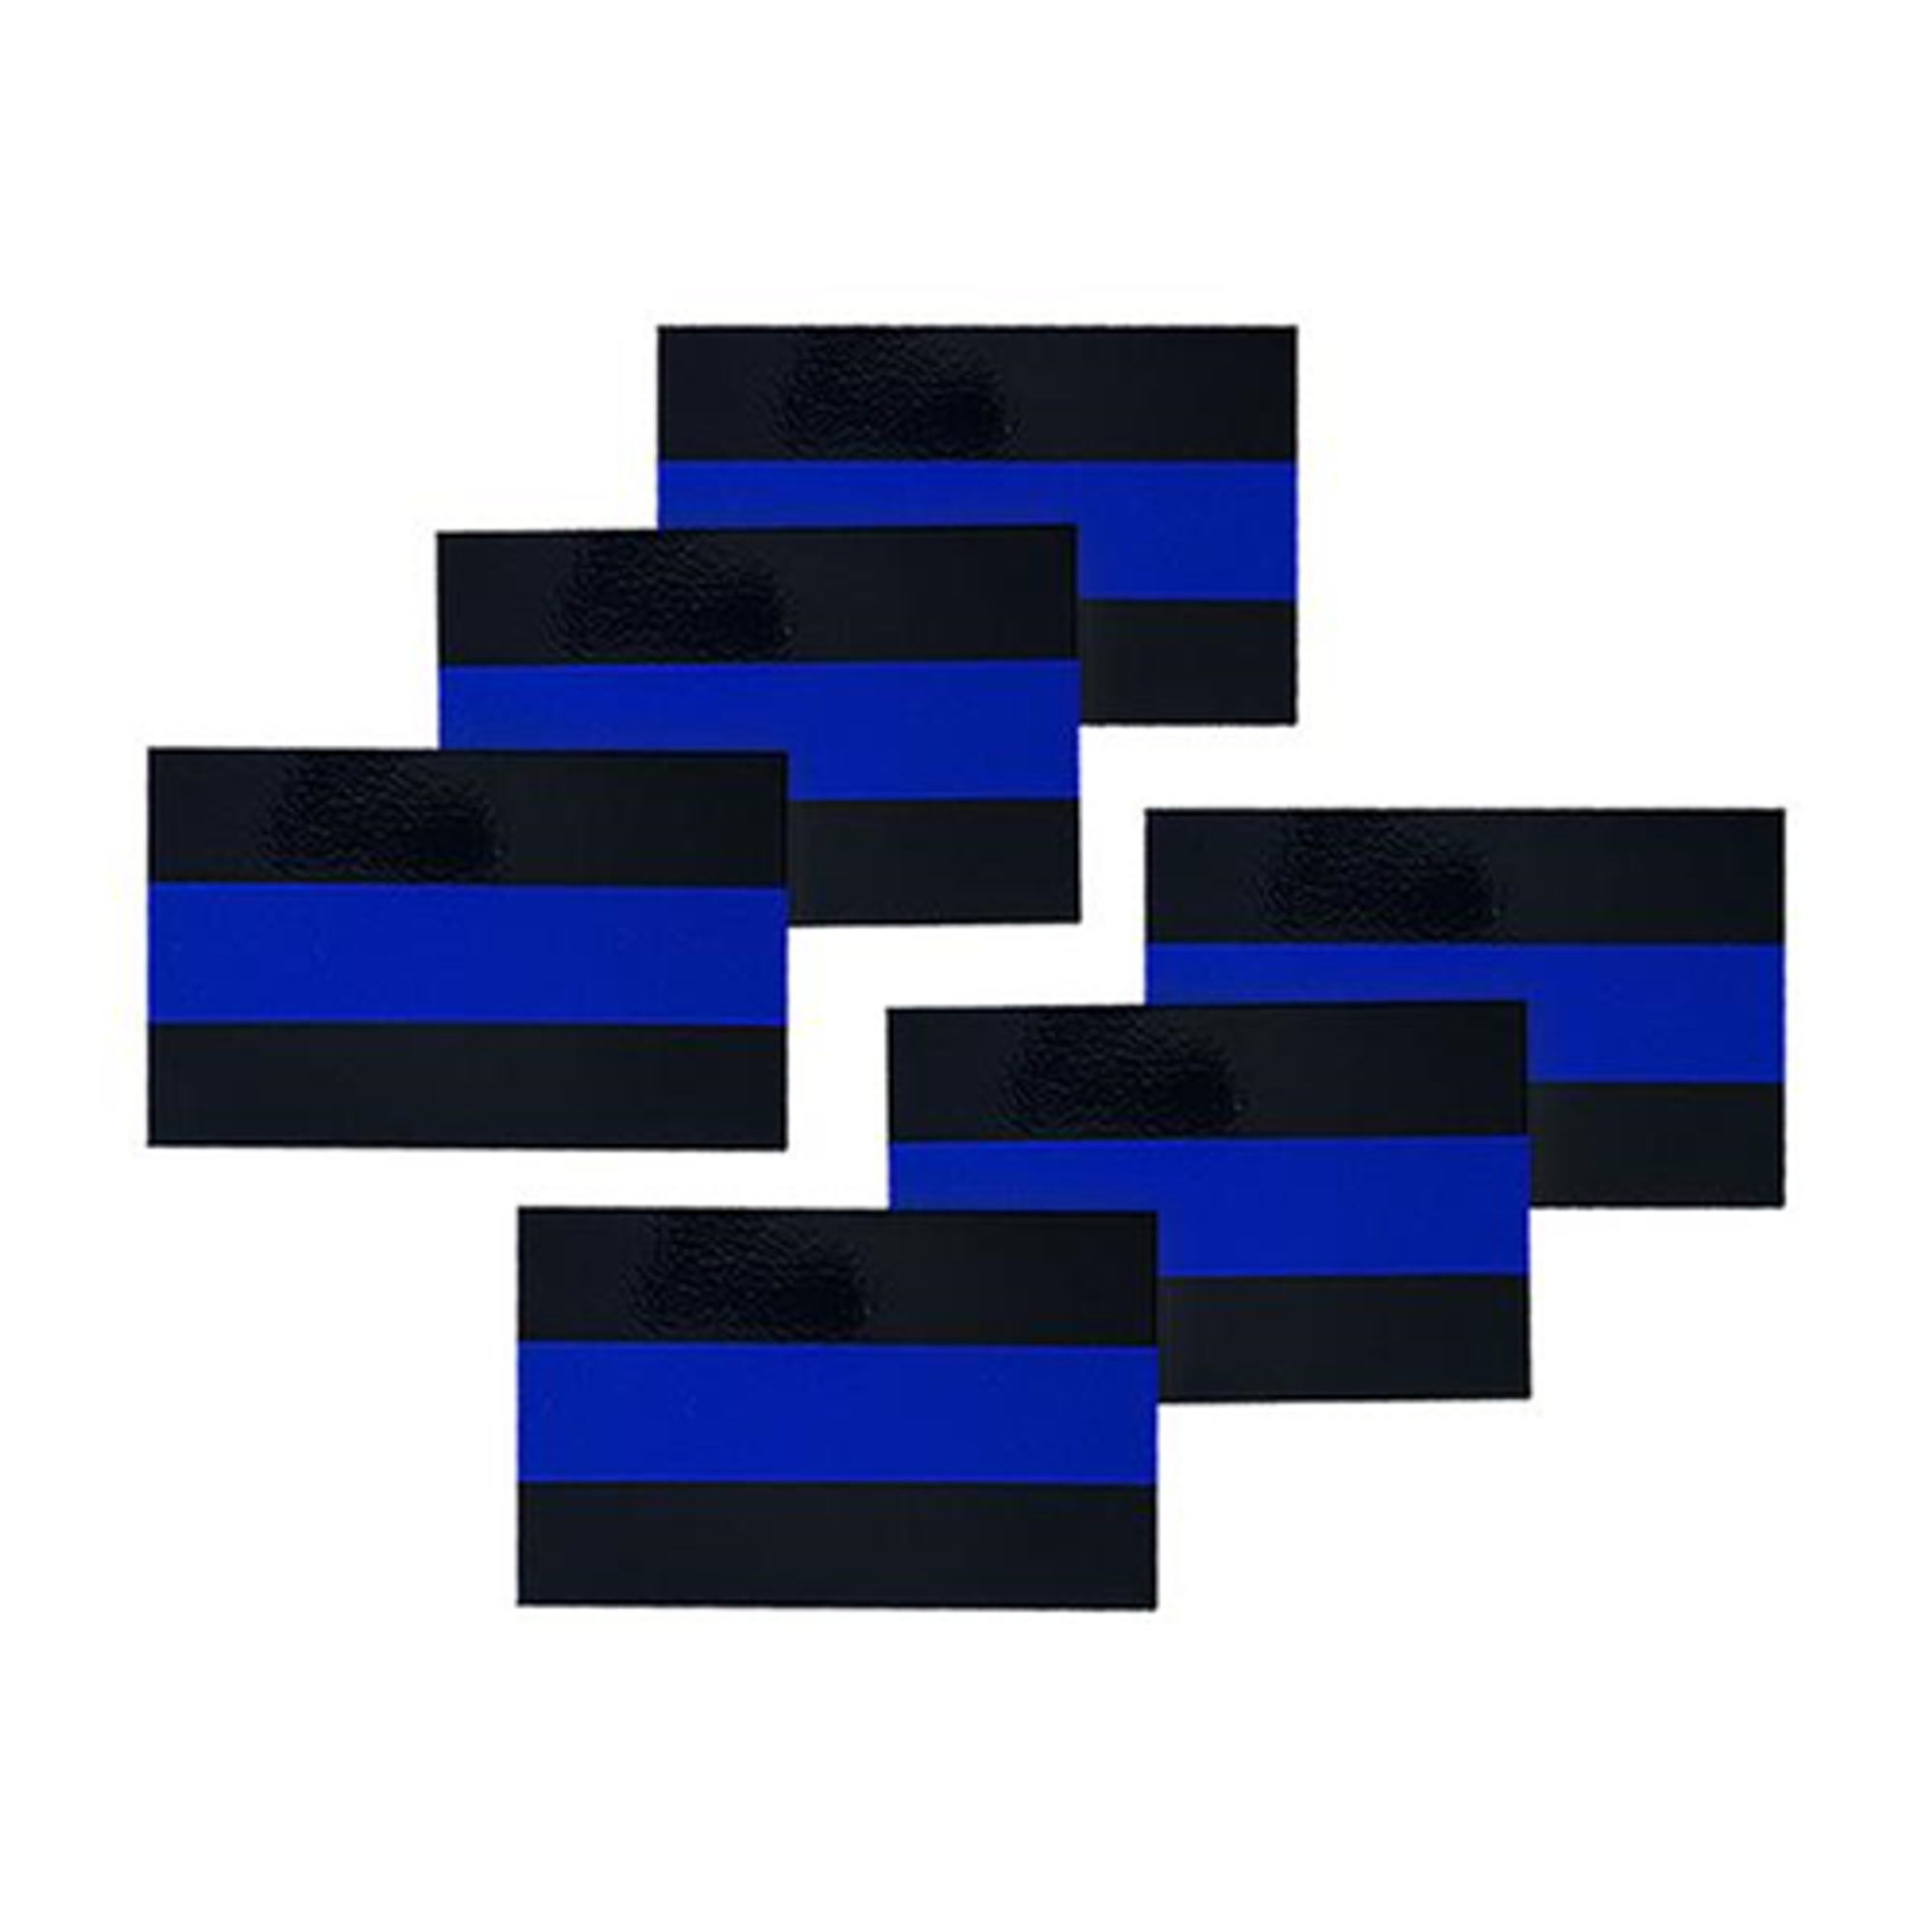 Reflective Thin Blue Line License Plate Stickers, 1 X .75 Inches, 6 Pack